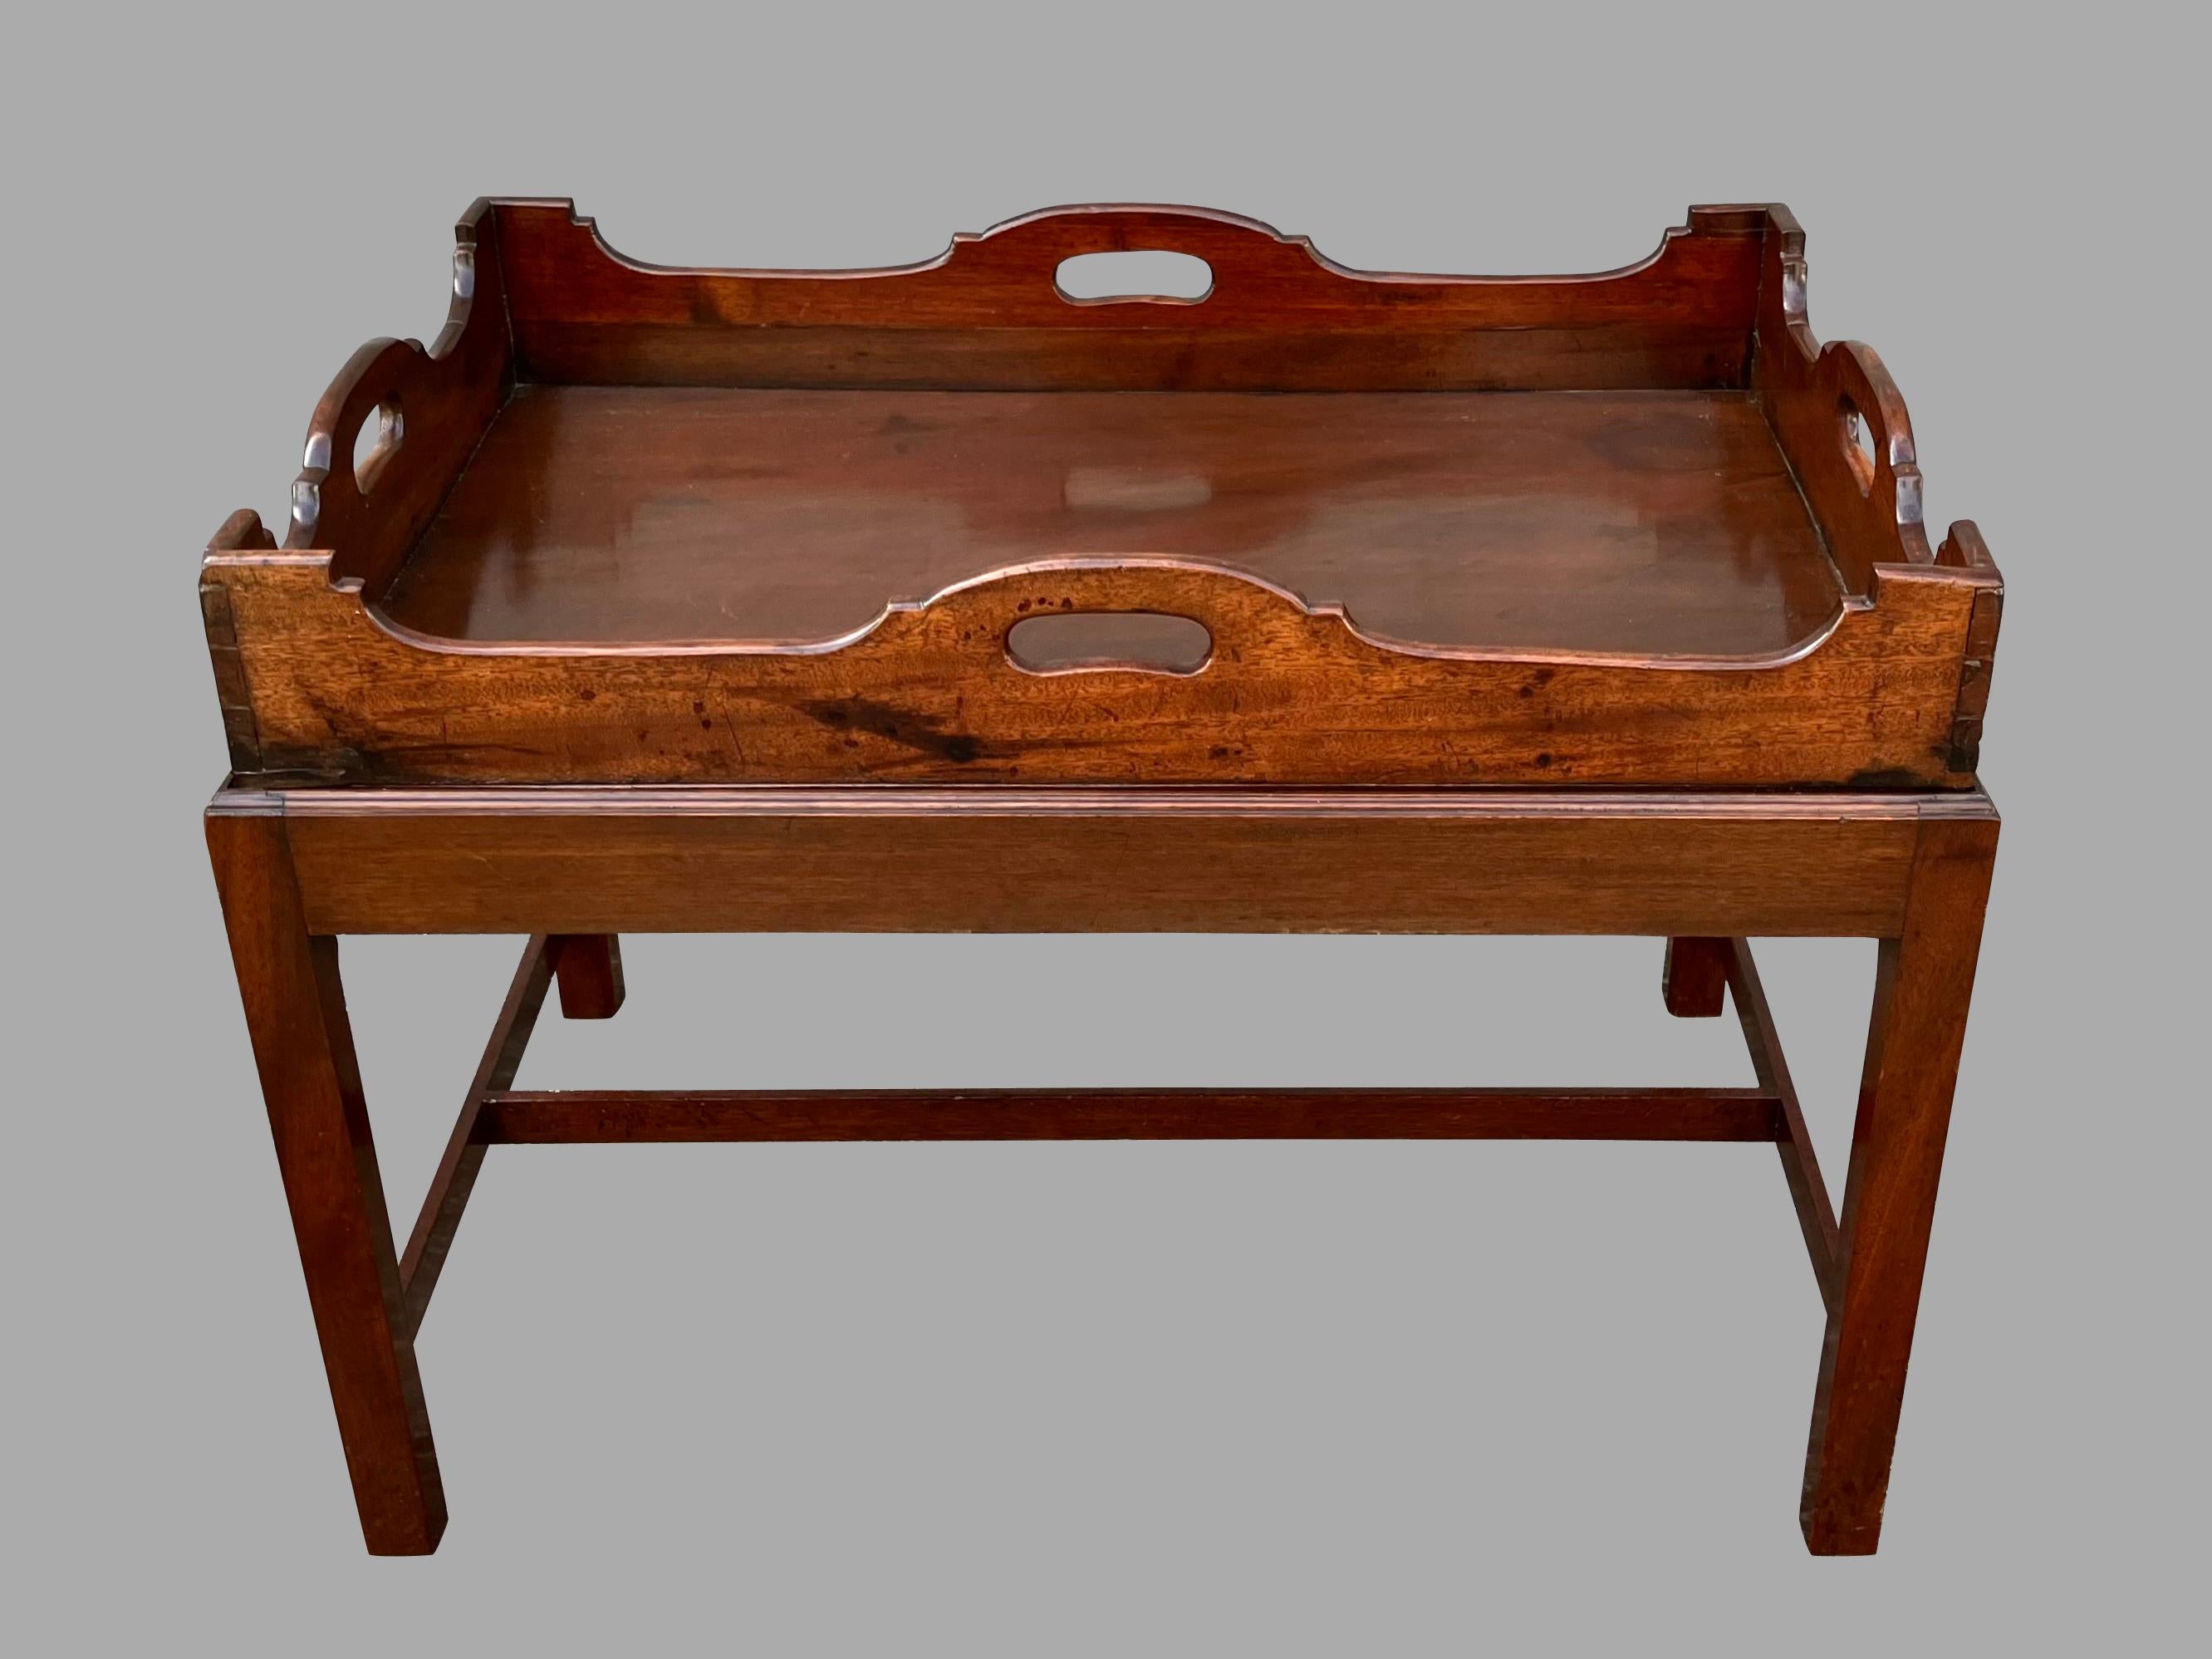 An English mahogany solid mahogany butlers tray with cutout side handles, the top edge of scalloped form, now resting on a custom Chippendale style stand of a later date with square legs joined by an H stretcher. The tray is removable from the stand